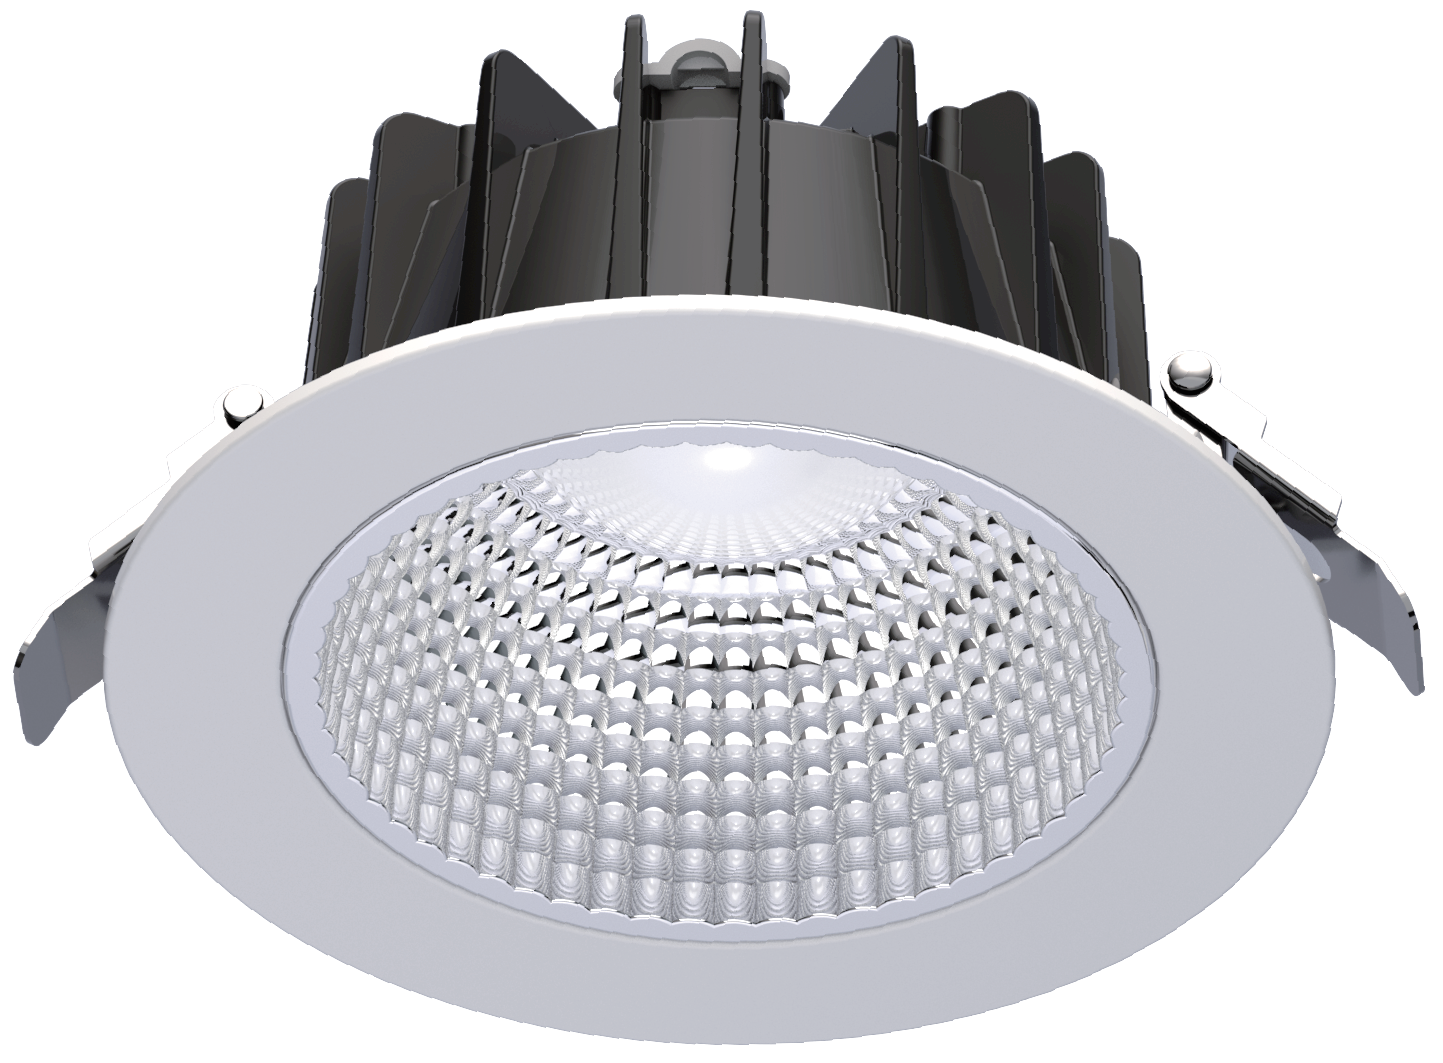 All in one commercial downlights range IP54 front 3CCT switchable Dali driver 8~35W 5RS095 Featured Image